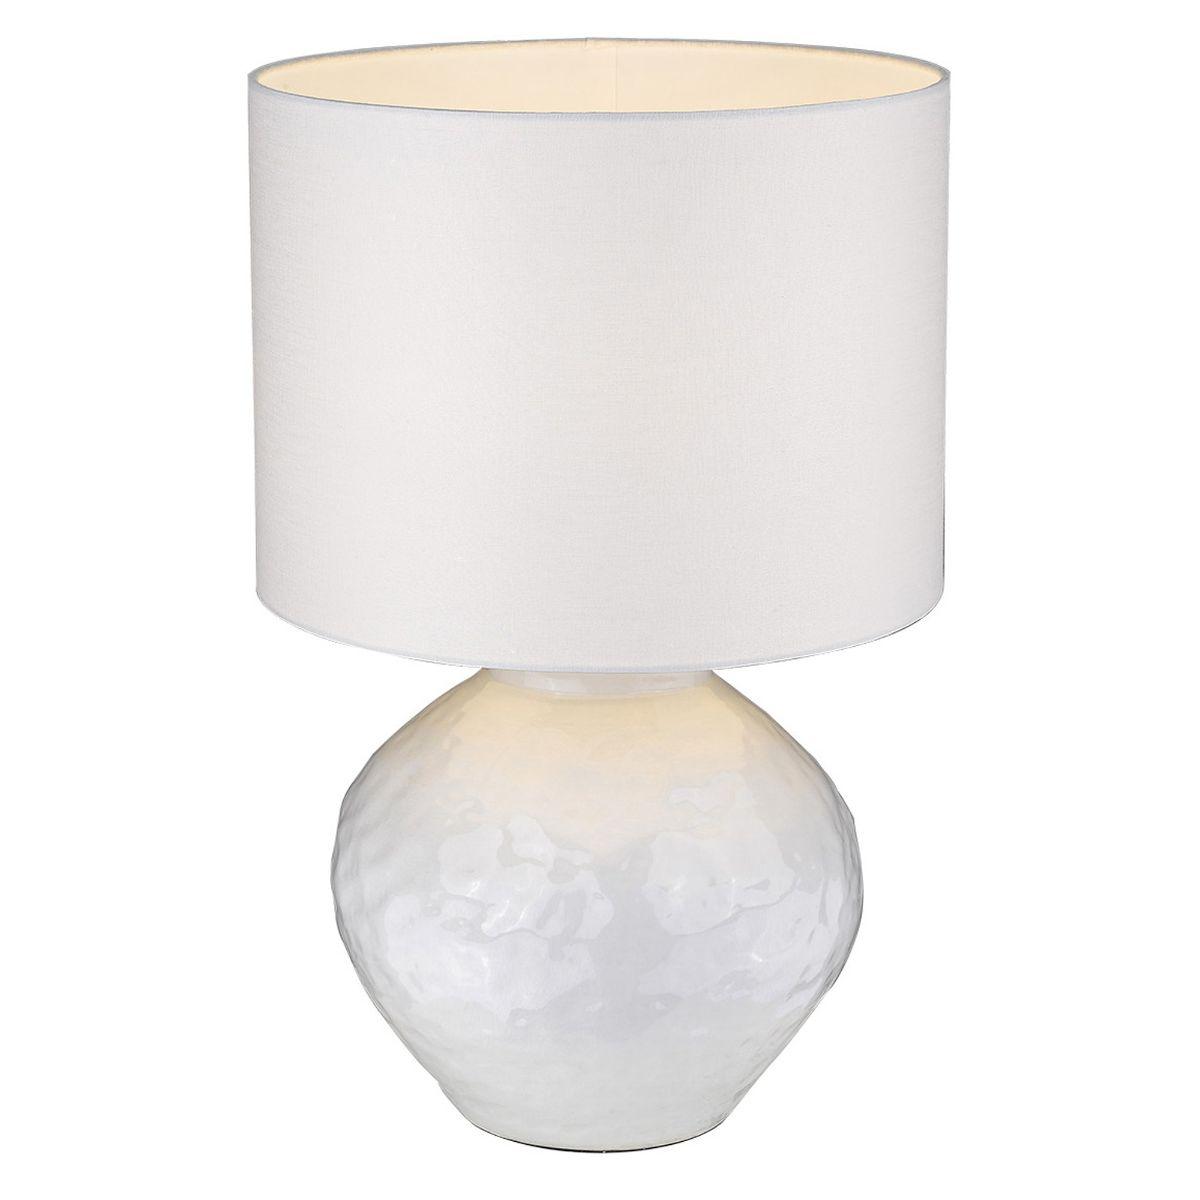 Trend Home 1 Light 26 inches Table Lamp White Hammered Ceramic Body and Polished Nickel Accents